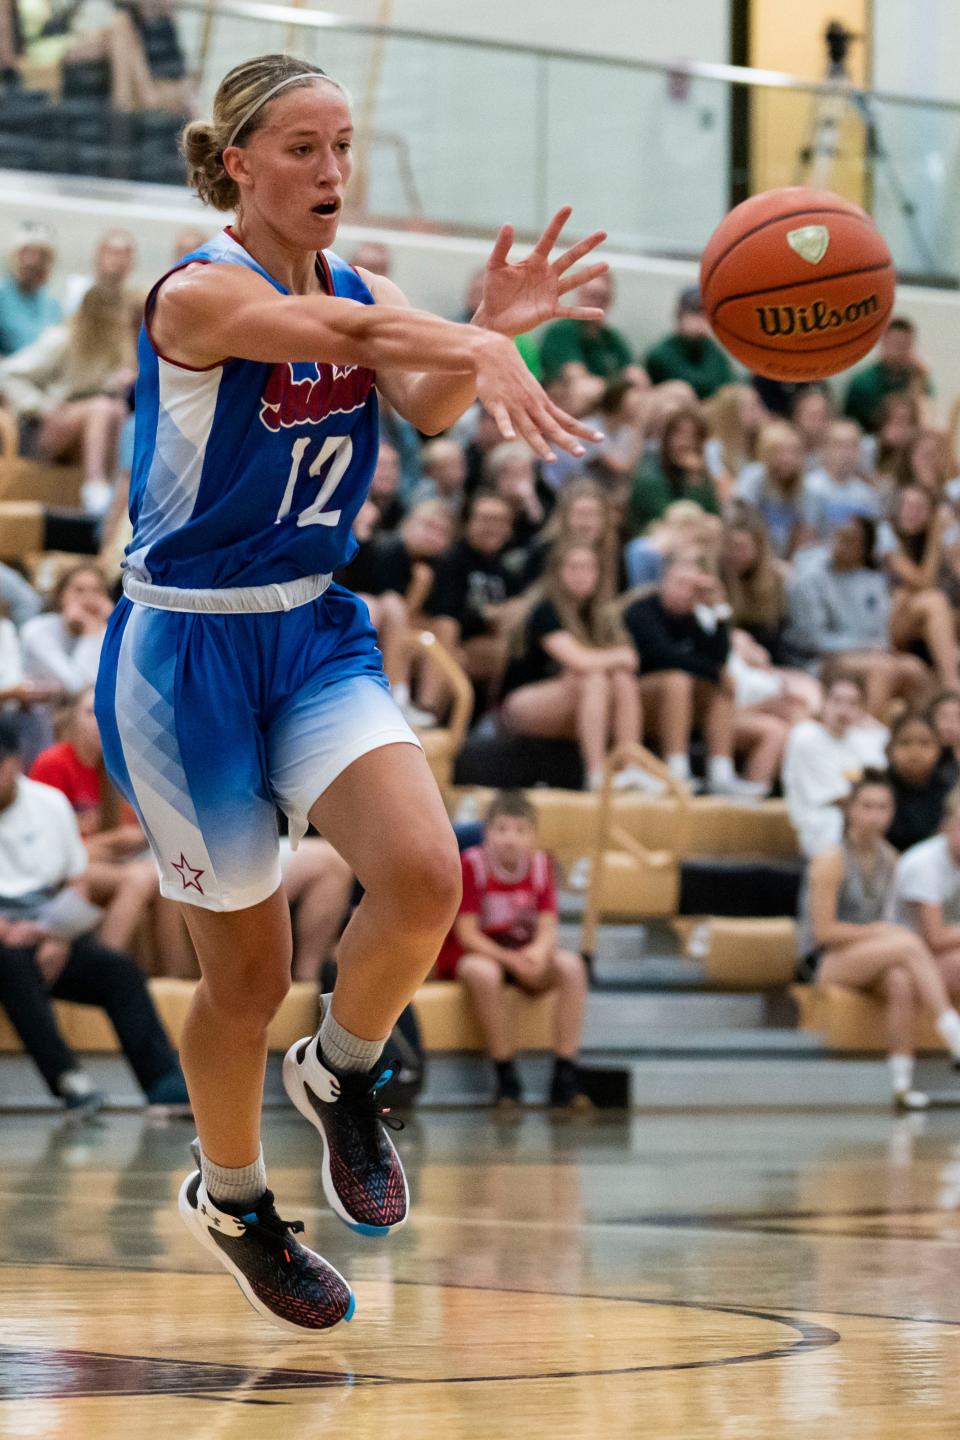 Junior All-Stars Ashlynn Shade (12) passes the ball during the game against the Indiana All-Stars on Wednesday, June 8, 2022, at Mt. Vernon High School in Fortville.